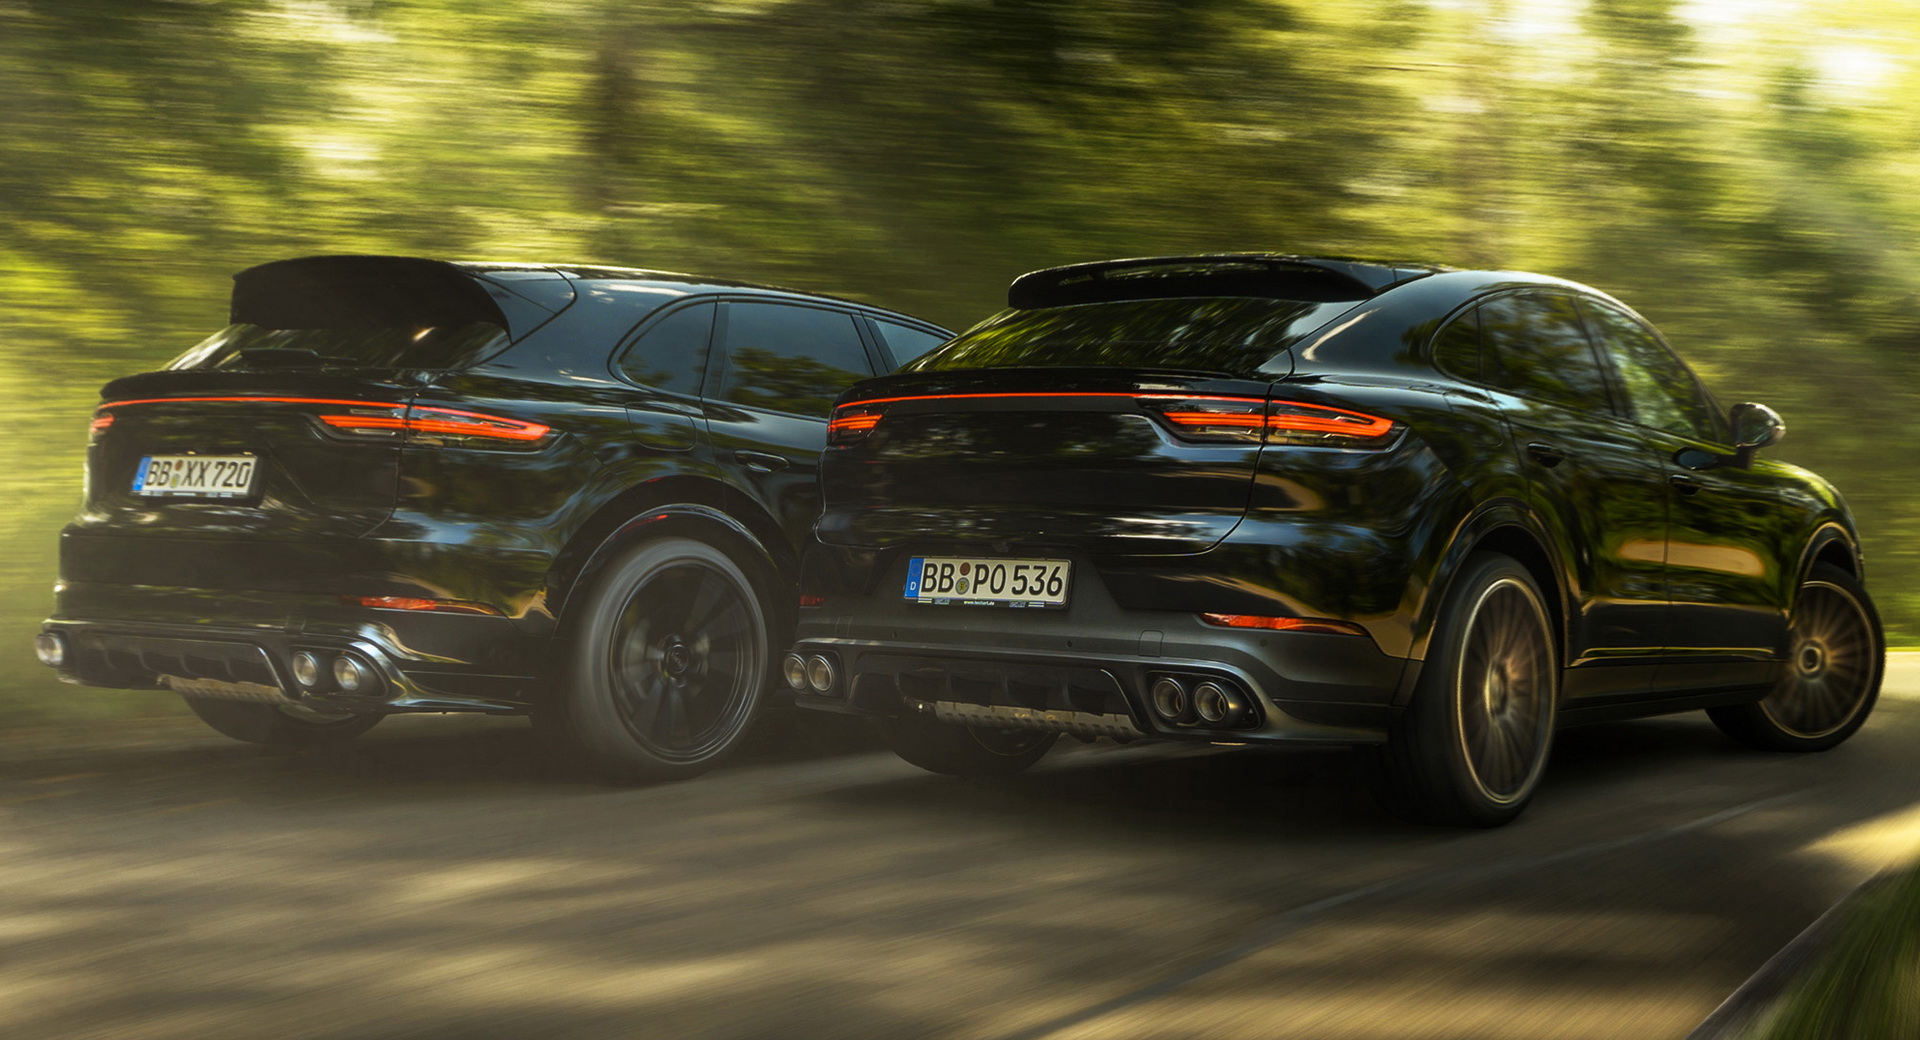 Techart will transform your Porsche Cayenne and give it up to 740 HP